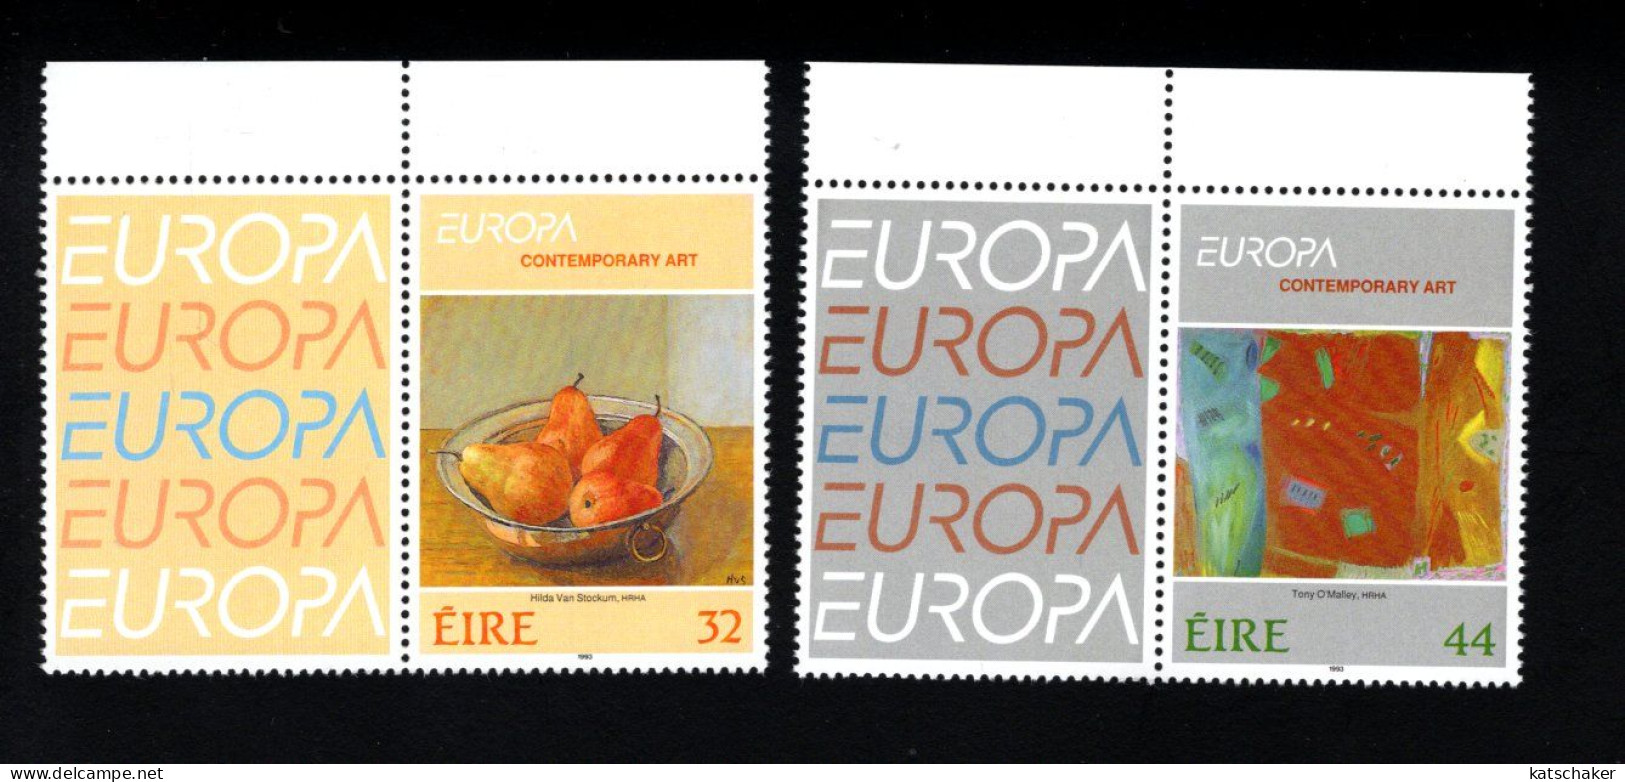 1993956119 1993 SCOTT 895 896  (XX) POSTFRIS MINT NEVER HINGED - EUROPA ISSUE - PAINTINGS COMPTEMORARY ART  LABEL LEFT - Unused Stamps